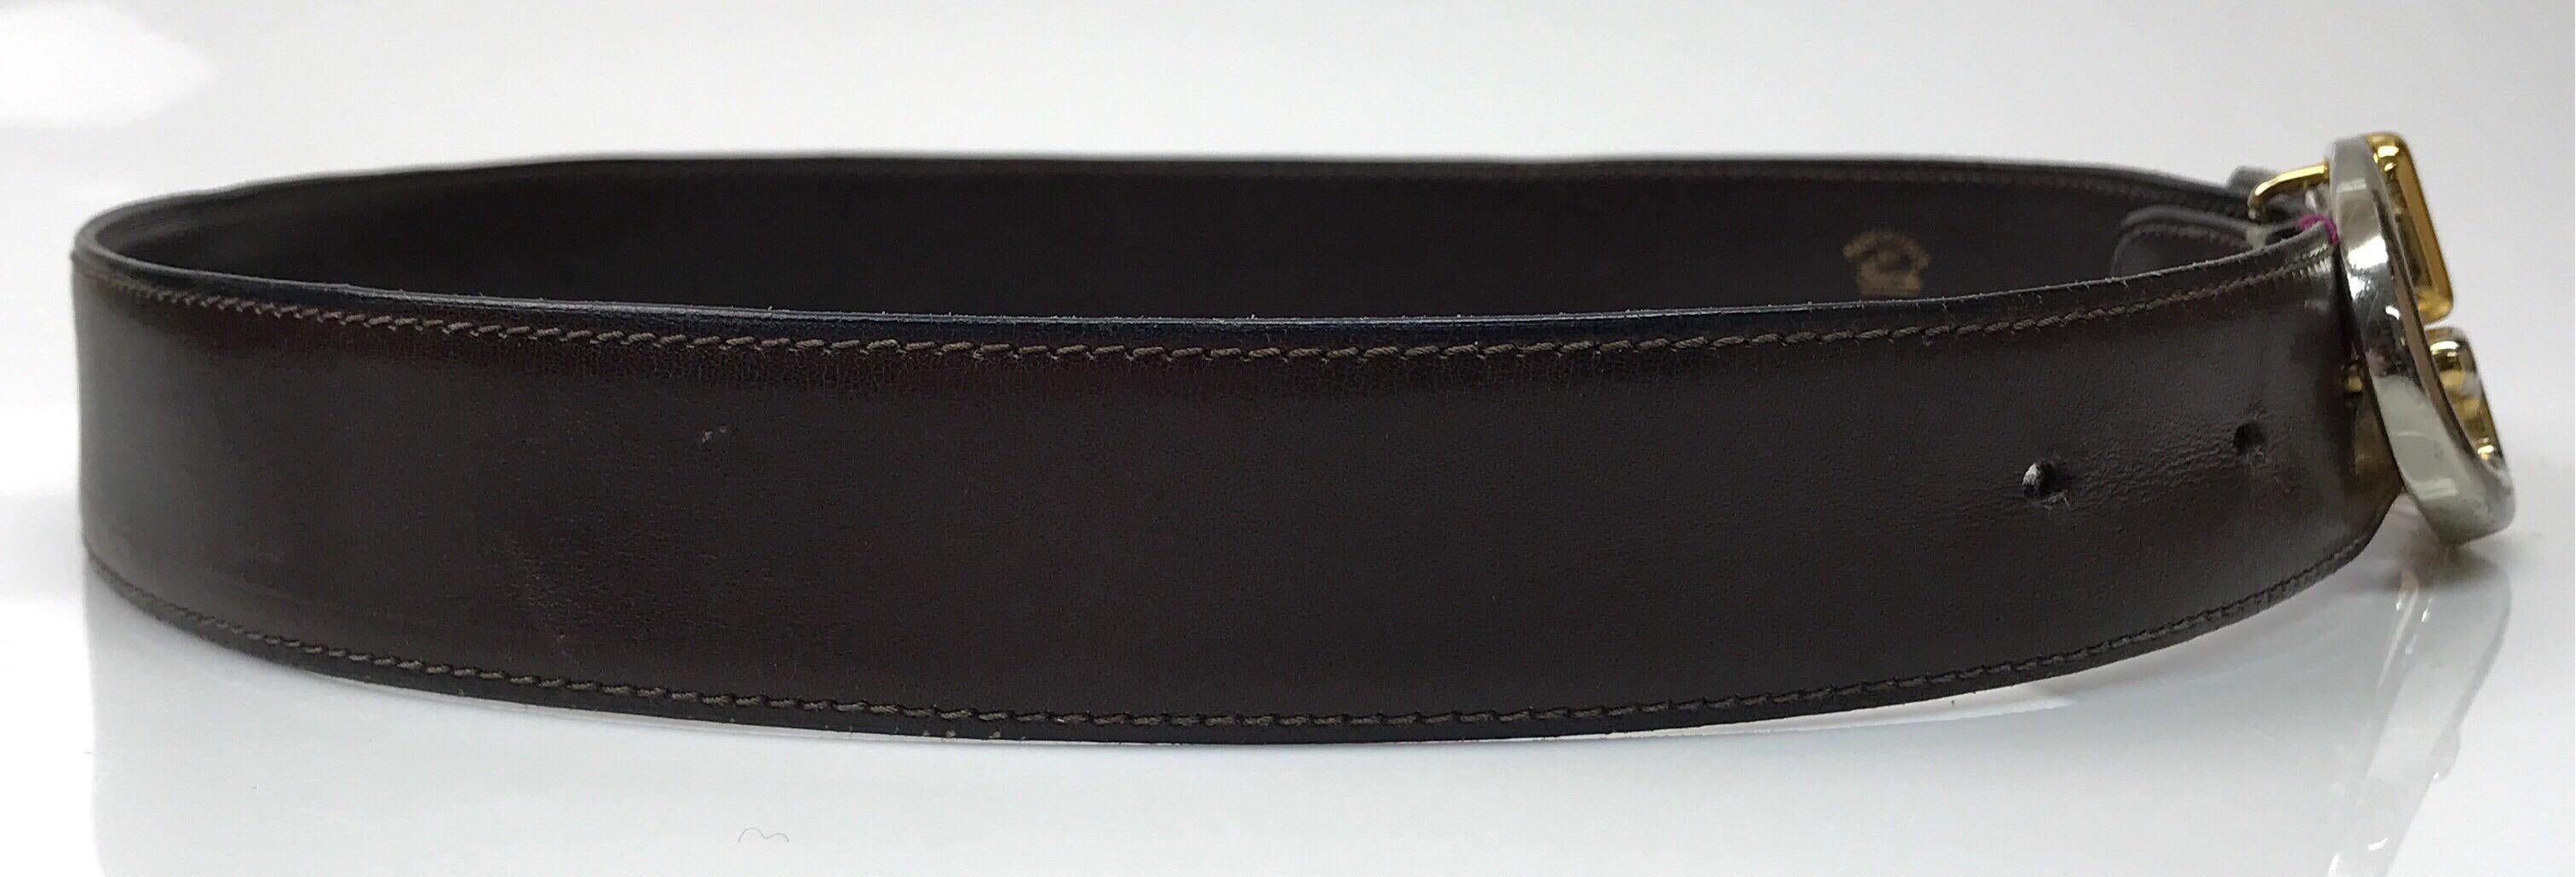 Gucci Brown Leather Belt w/ Silver/ Gold Buckle- 75/30. This amazing Gucci belt is in good condition. The buckle holes show sign of use and there are small scratches in the leather. The belt is made of brown soft leather on the inside and outside.